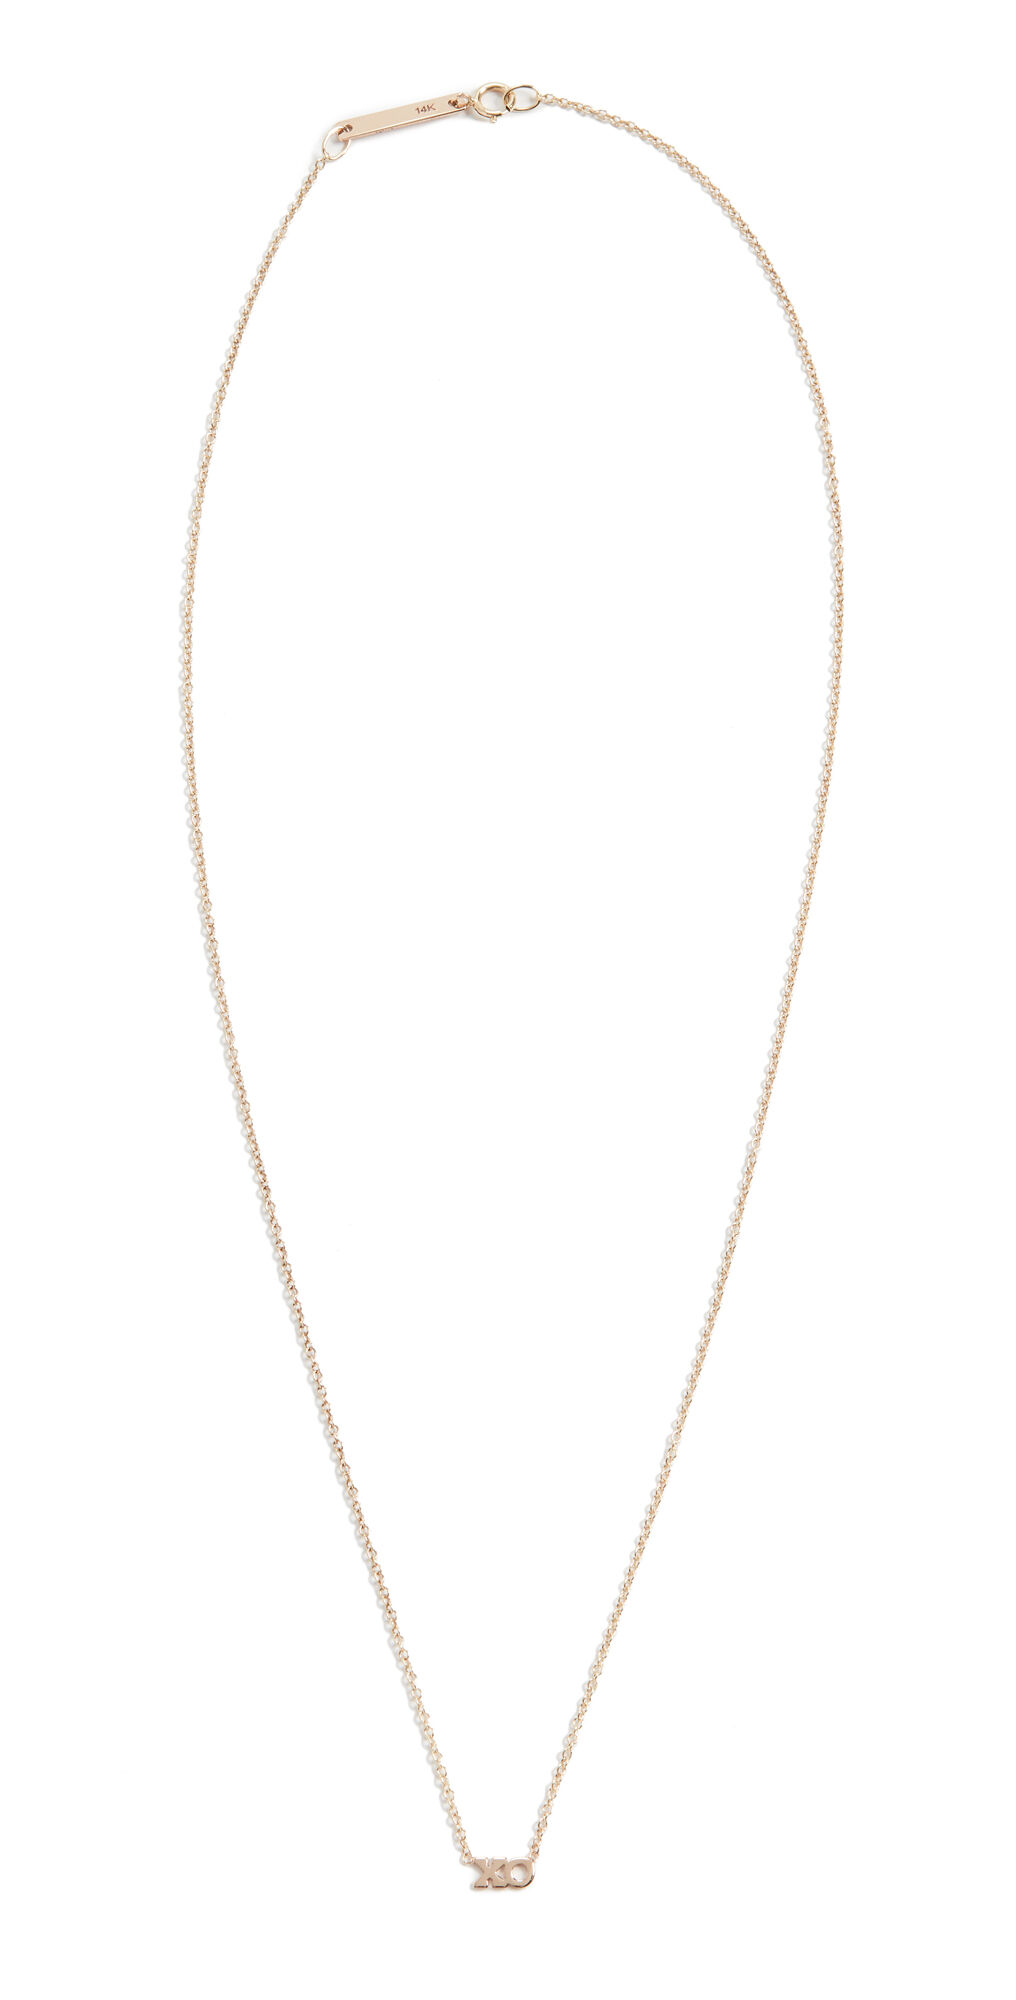 Chicco Zoe Chicco 14k Gold Itty Bitty Tiny Capital Letter Necklace Yellow Gold One Size  Yellow Gold  size:One Size